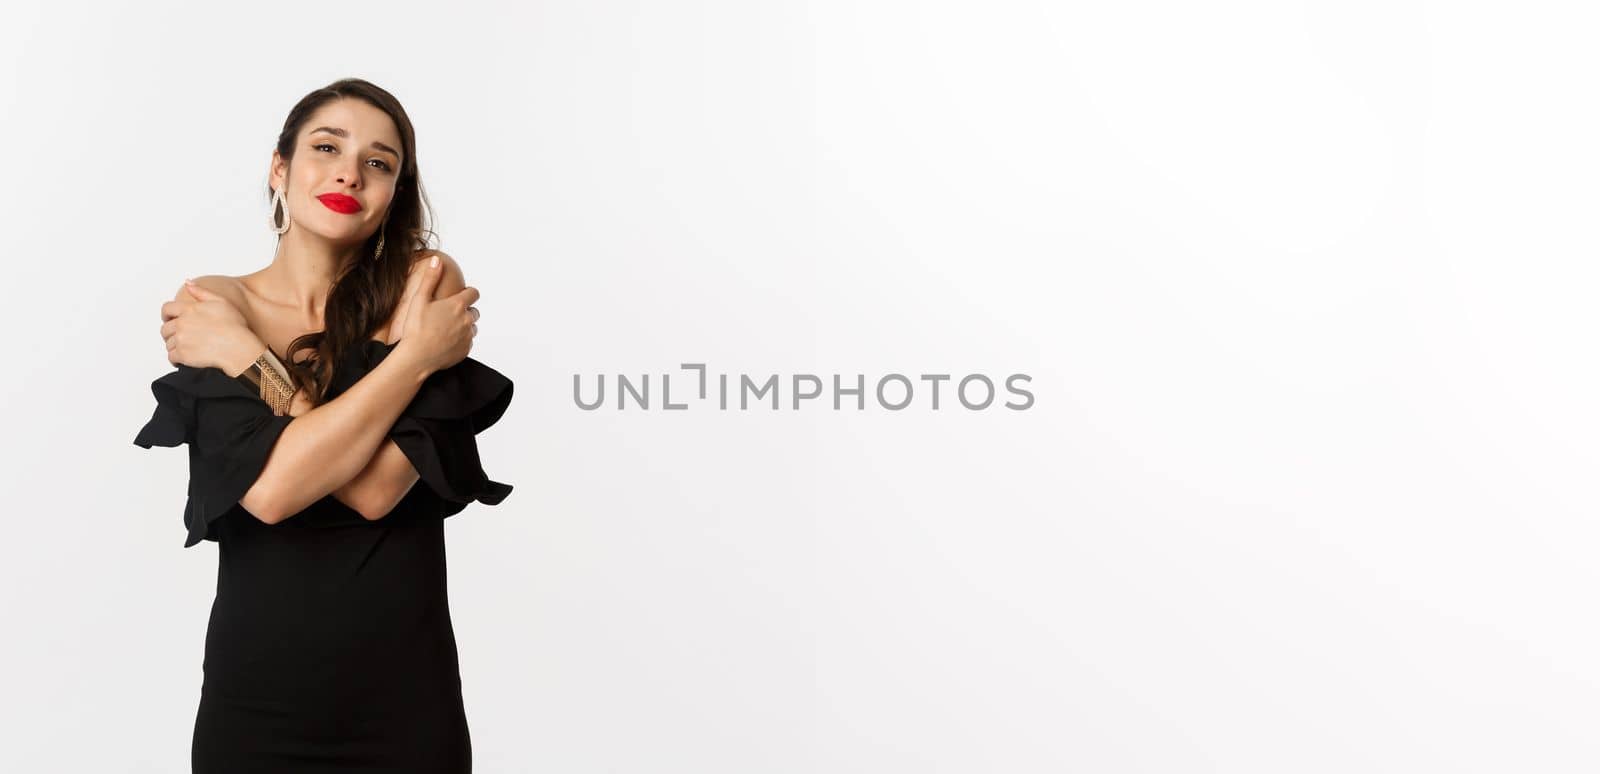 Fashion and beauty. Sensual and tender woman in black dress, embracing own body, hugging herself and smiling, standing over white background.